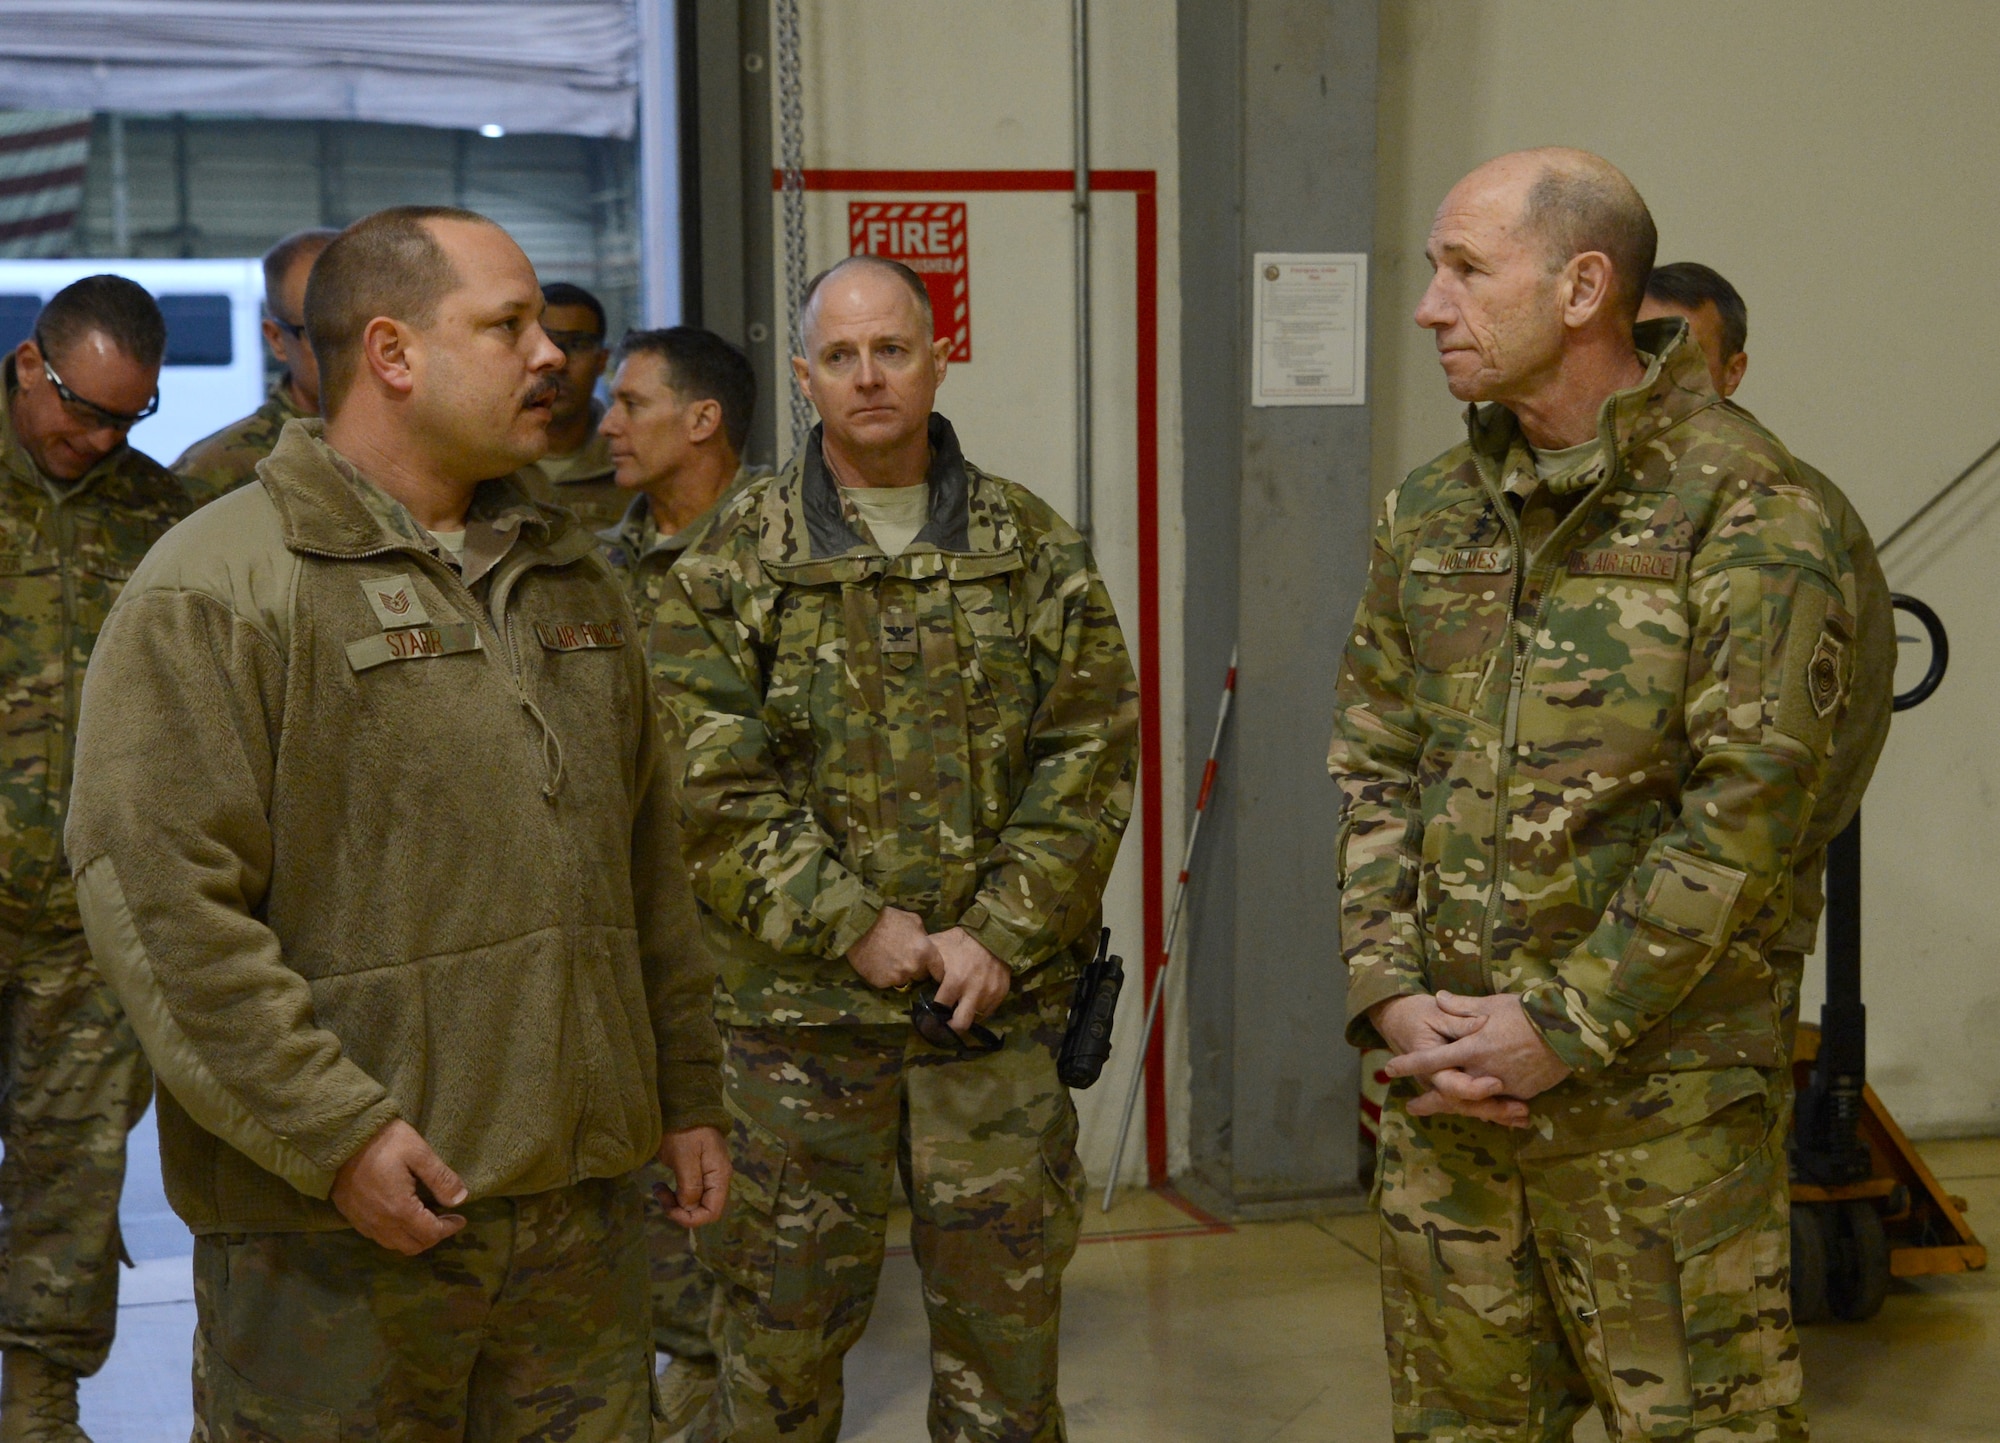 Gen. Mike Holmes, commander of Air Combat Command, speaks with Tech. Sgt. Christopher Starr, from the 455th Expeditionary Maintenance Squadron, during his visit Feb. 9, 2018 at Bagram Airfield, Afghanistan.